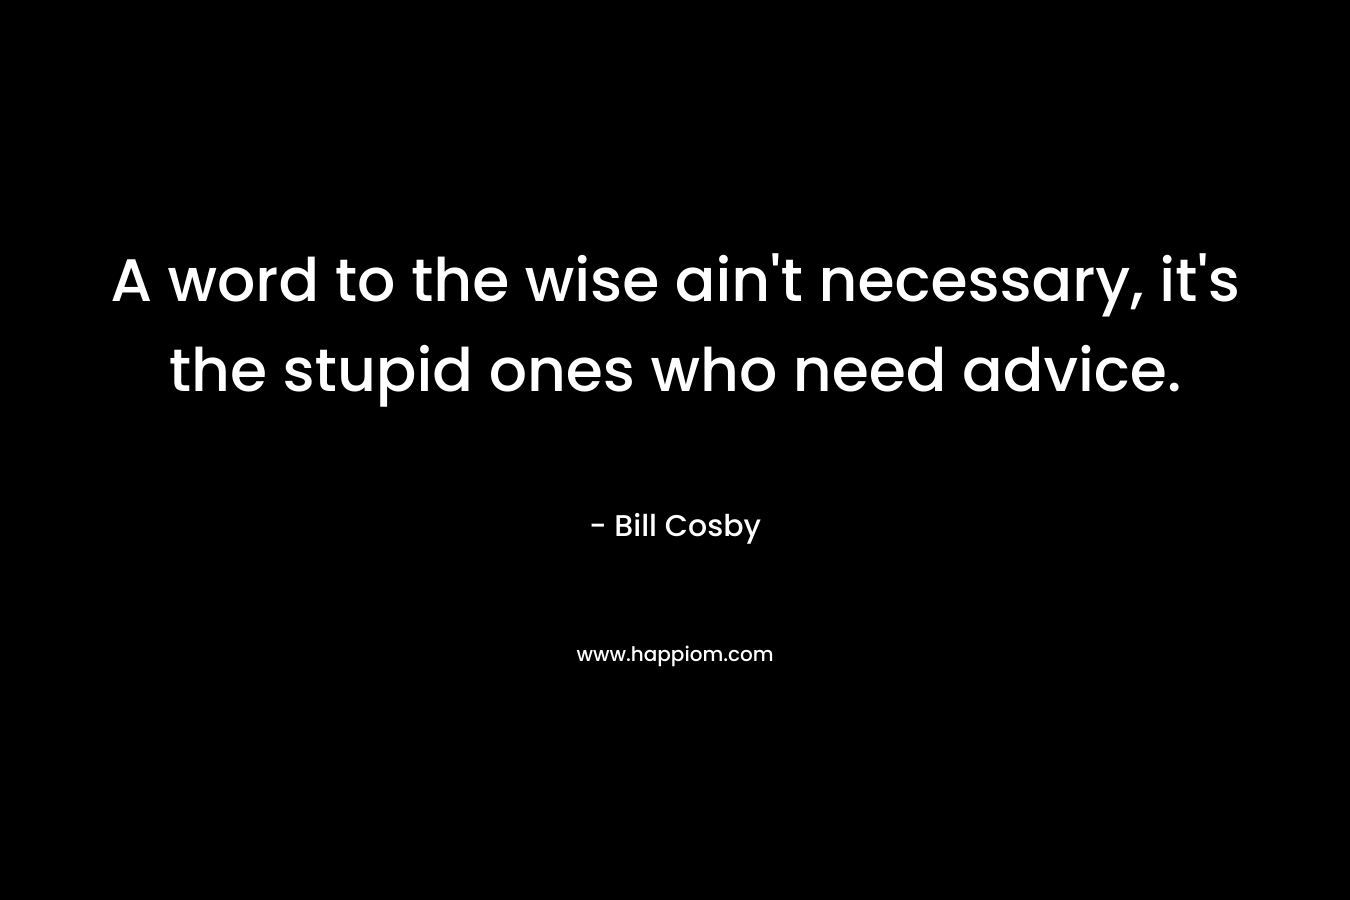 A word to the wise ain't necessary, it's the stupid ones who need advice.